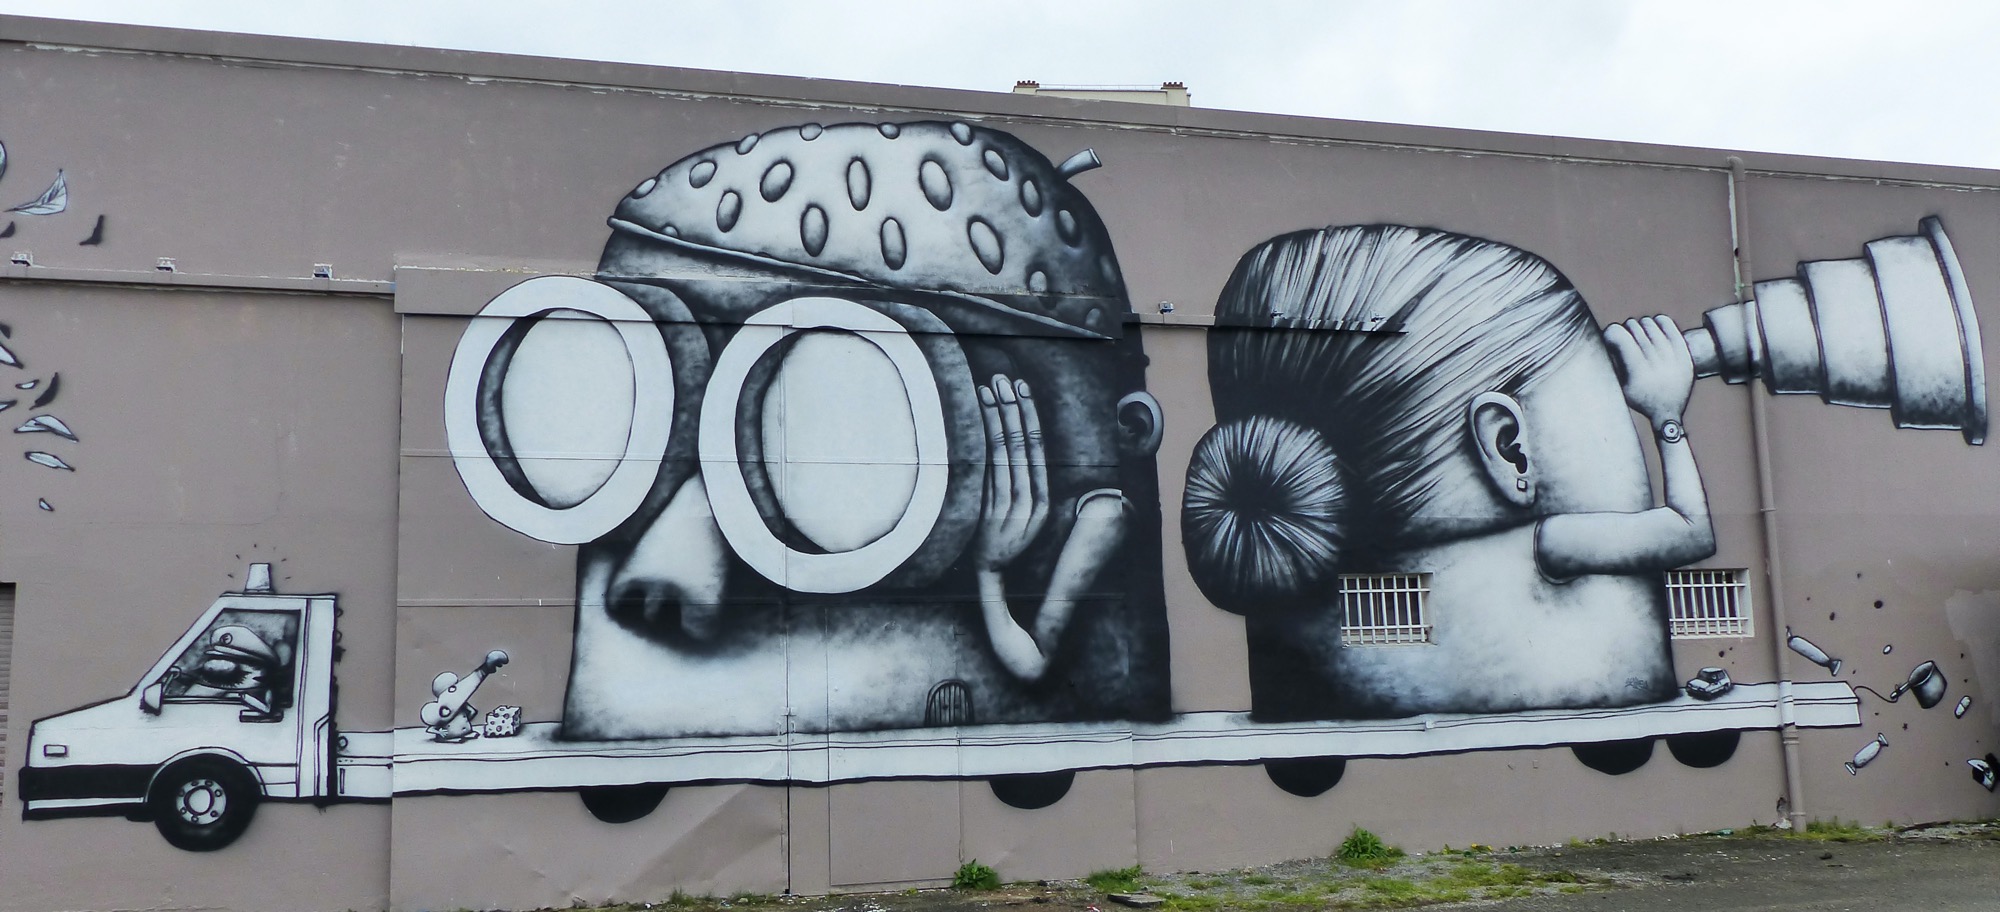 Graffiti 3  by the artist Ador captured by Rabot in Nantes France